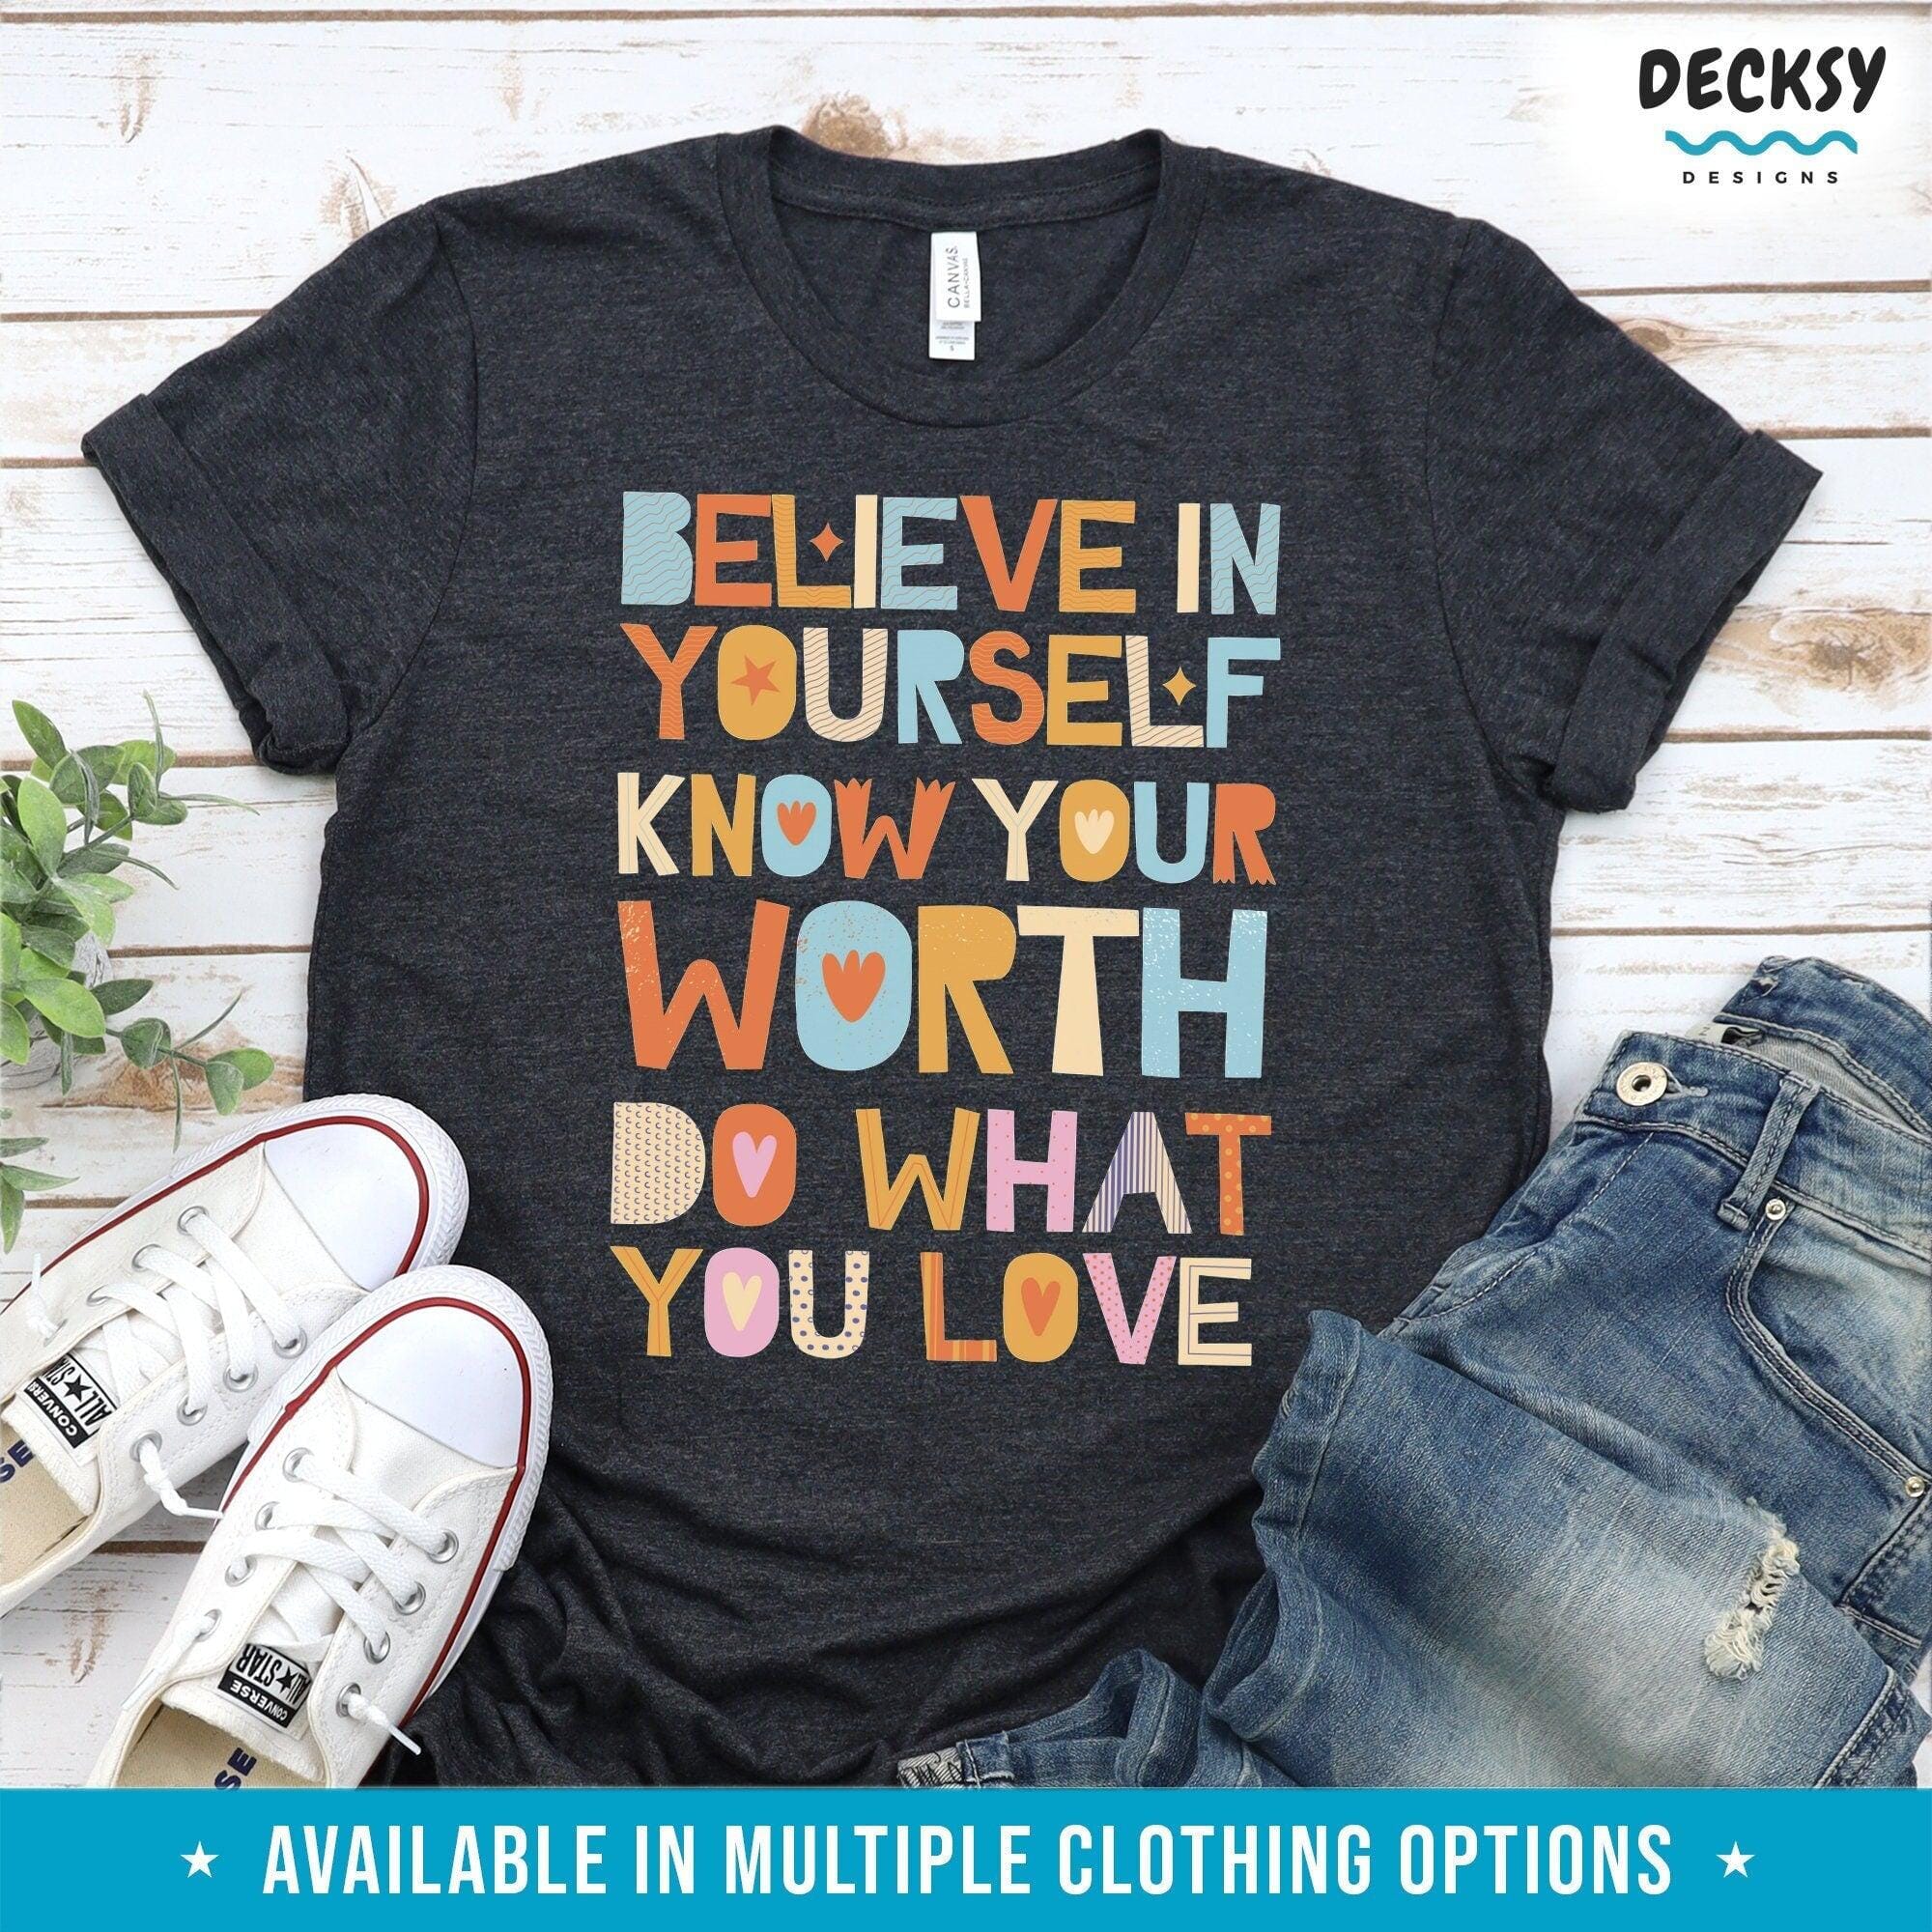 Believe In Yourself Inspirational Shirt, Motivational Gift-Clothing:Gender-Neutral Adult Clothing:Tops & Tees:T-shirts:Graphic Tees-DecksyDesigns